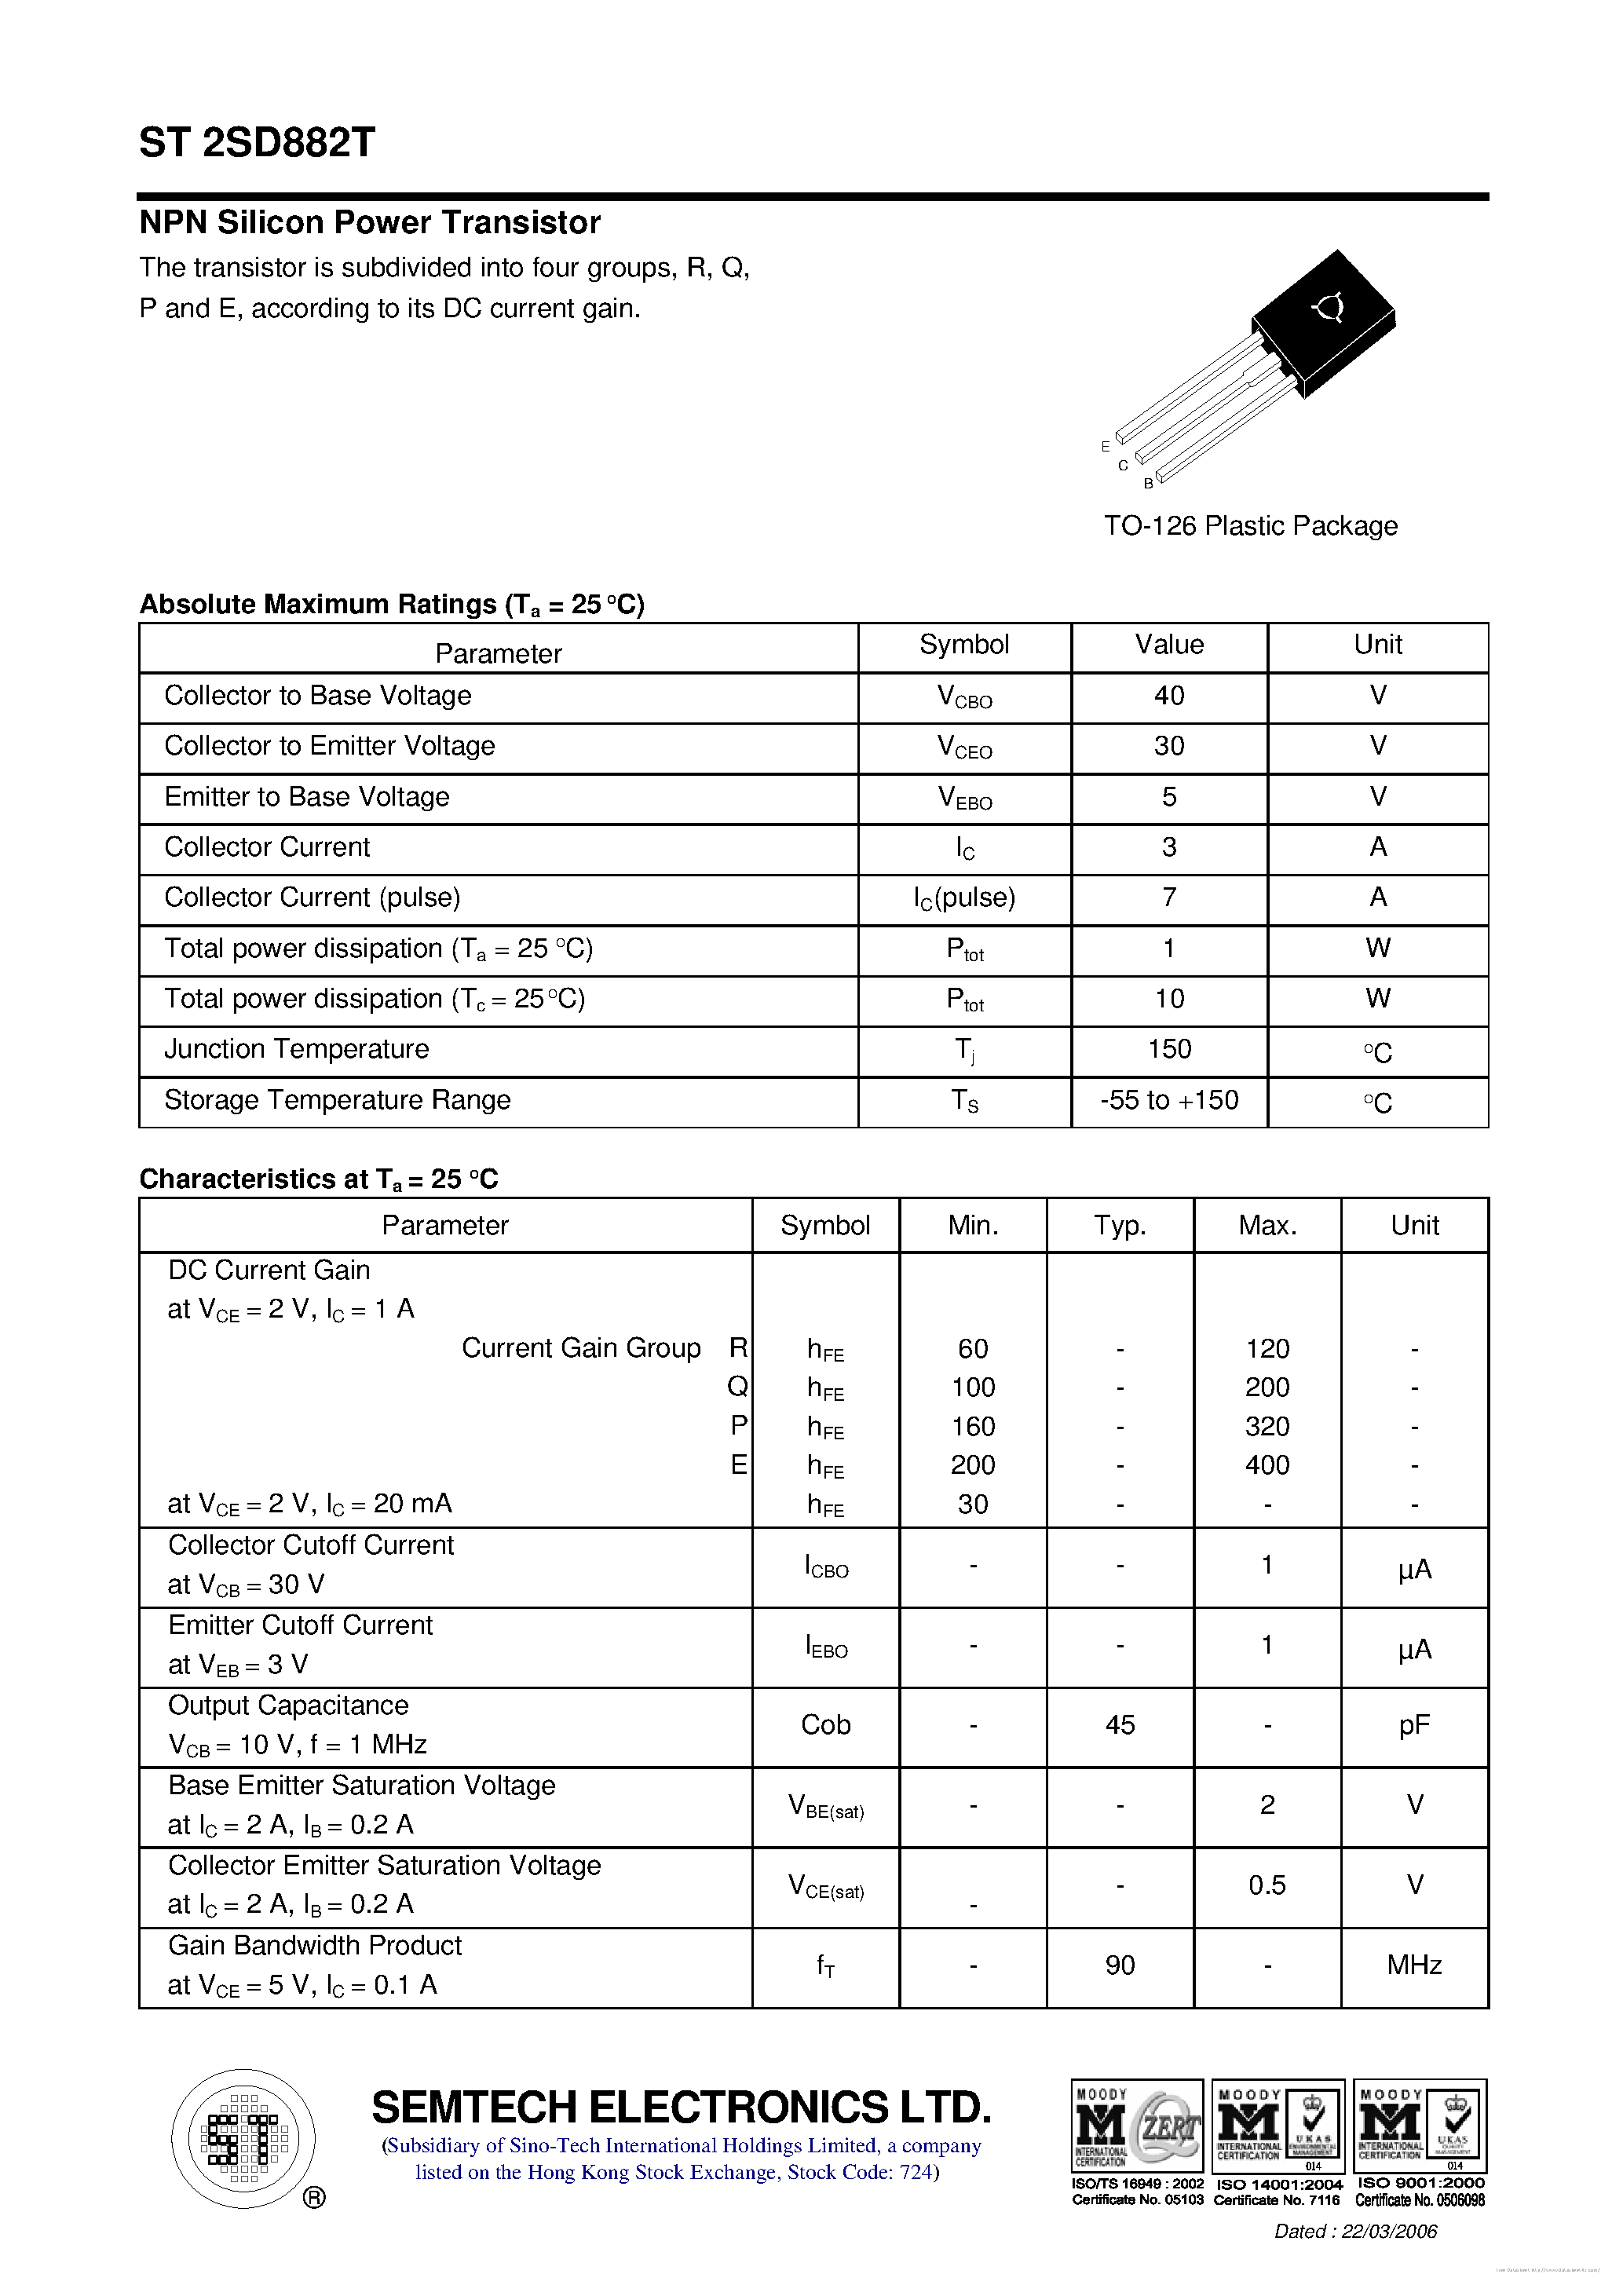 Datasheet ST2SD882T - page 1